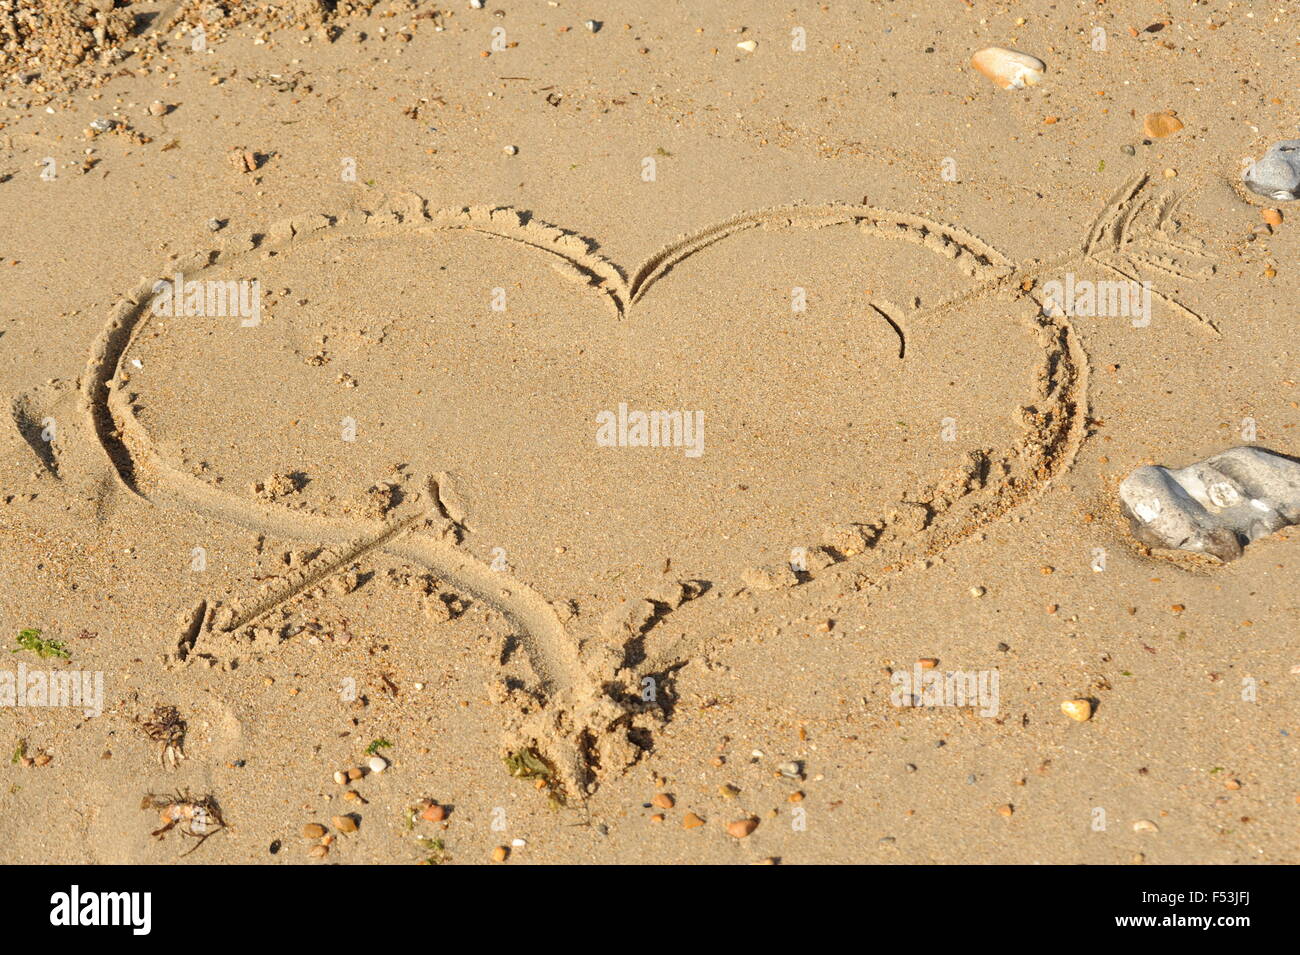 Heart Shape Drawn in the sand Stock Photo